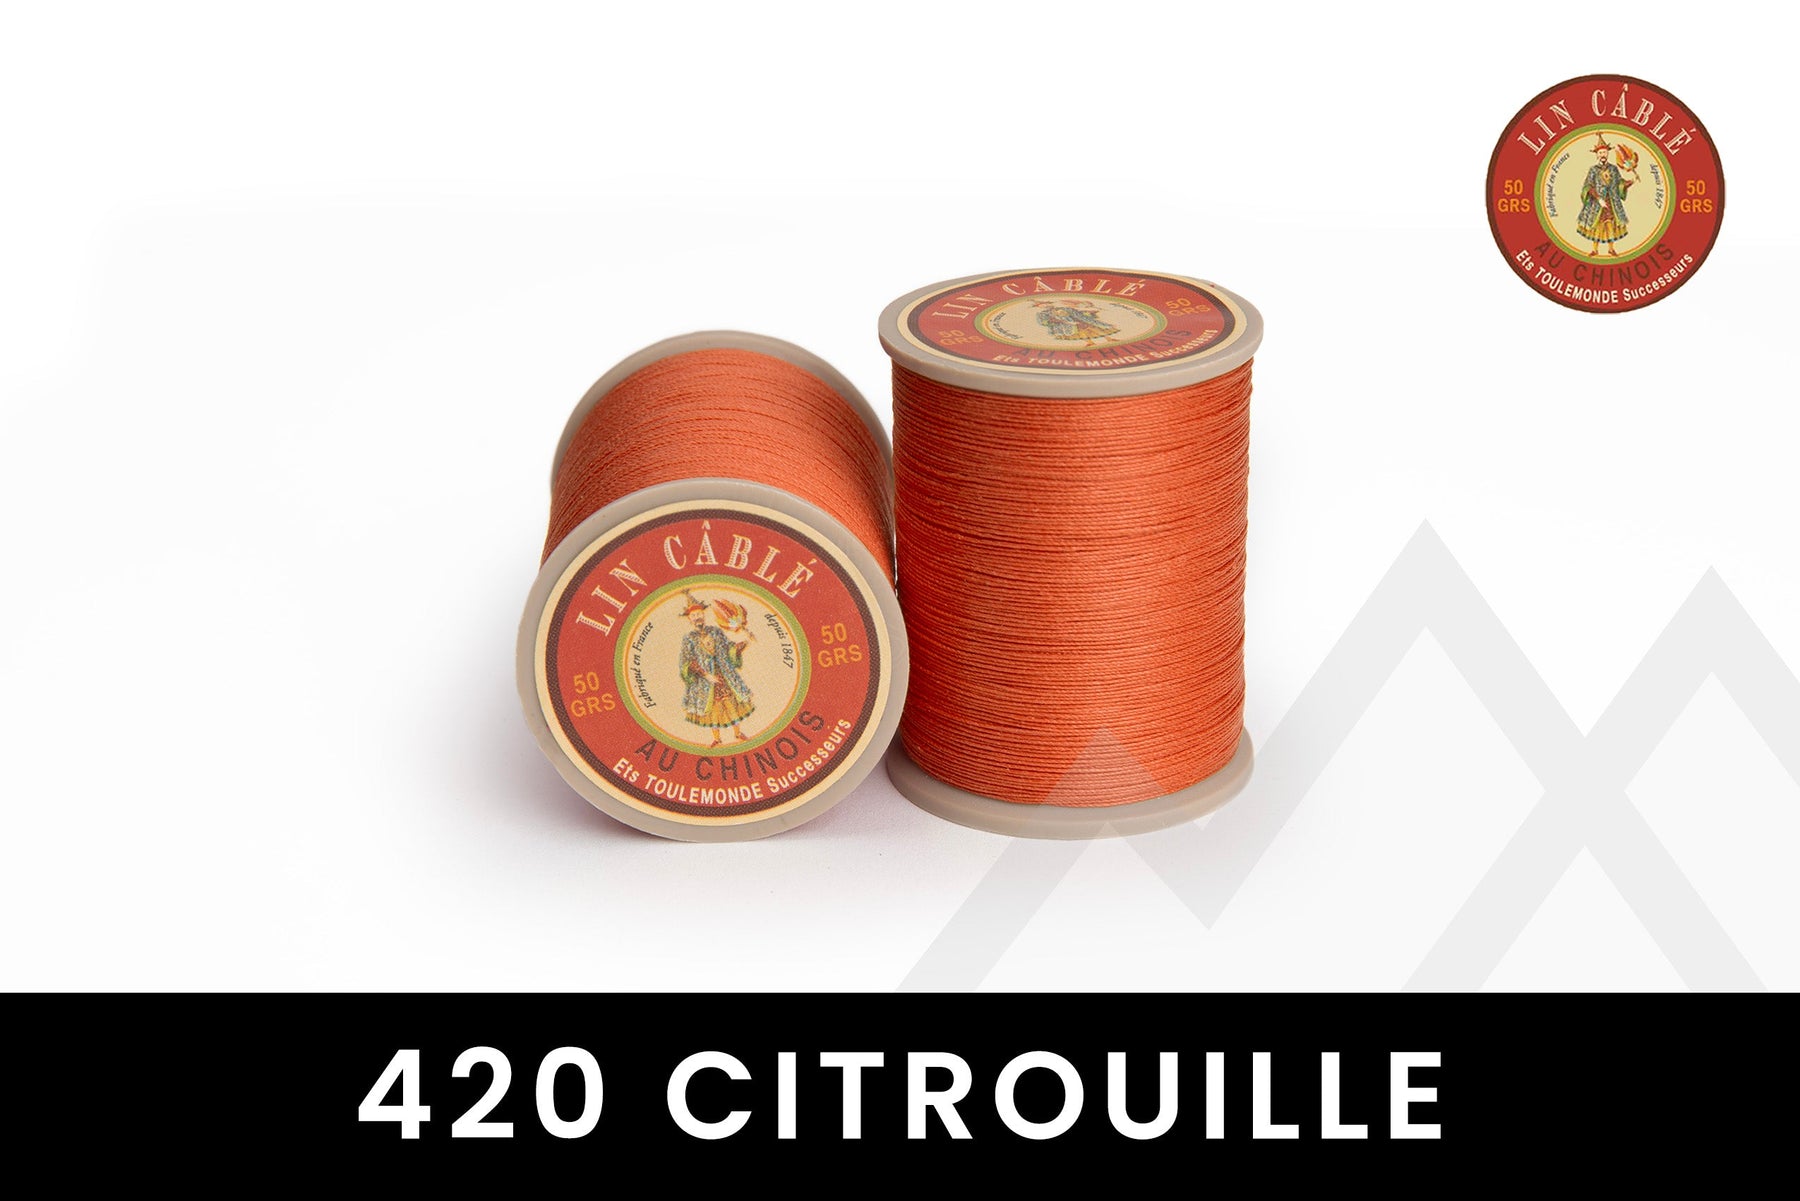 Fil au Chinois 🇫🇷 - "Lin Cable" Waxed Linen Thread (Size 532) *Full Spool